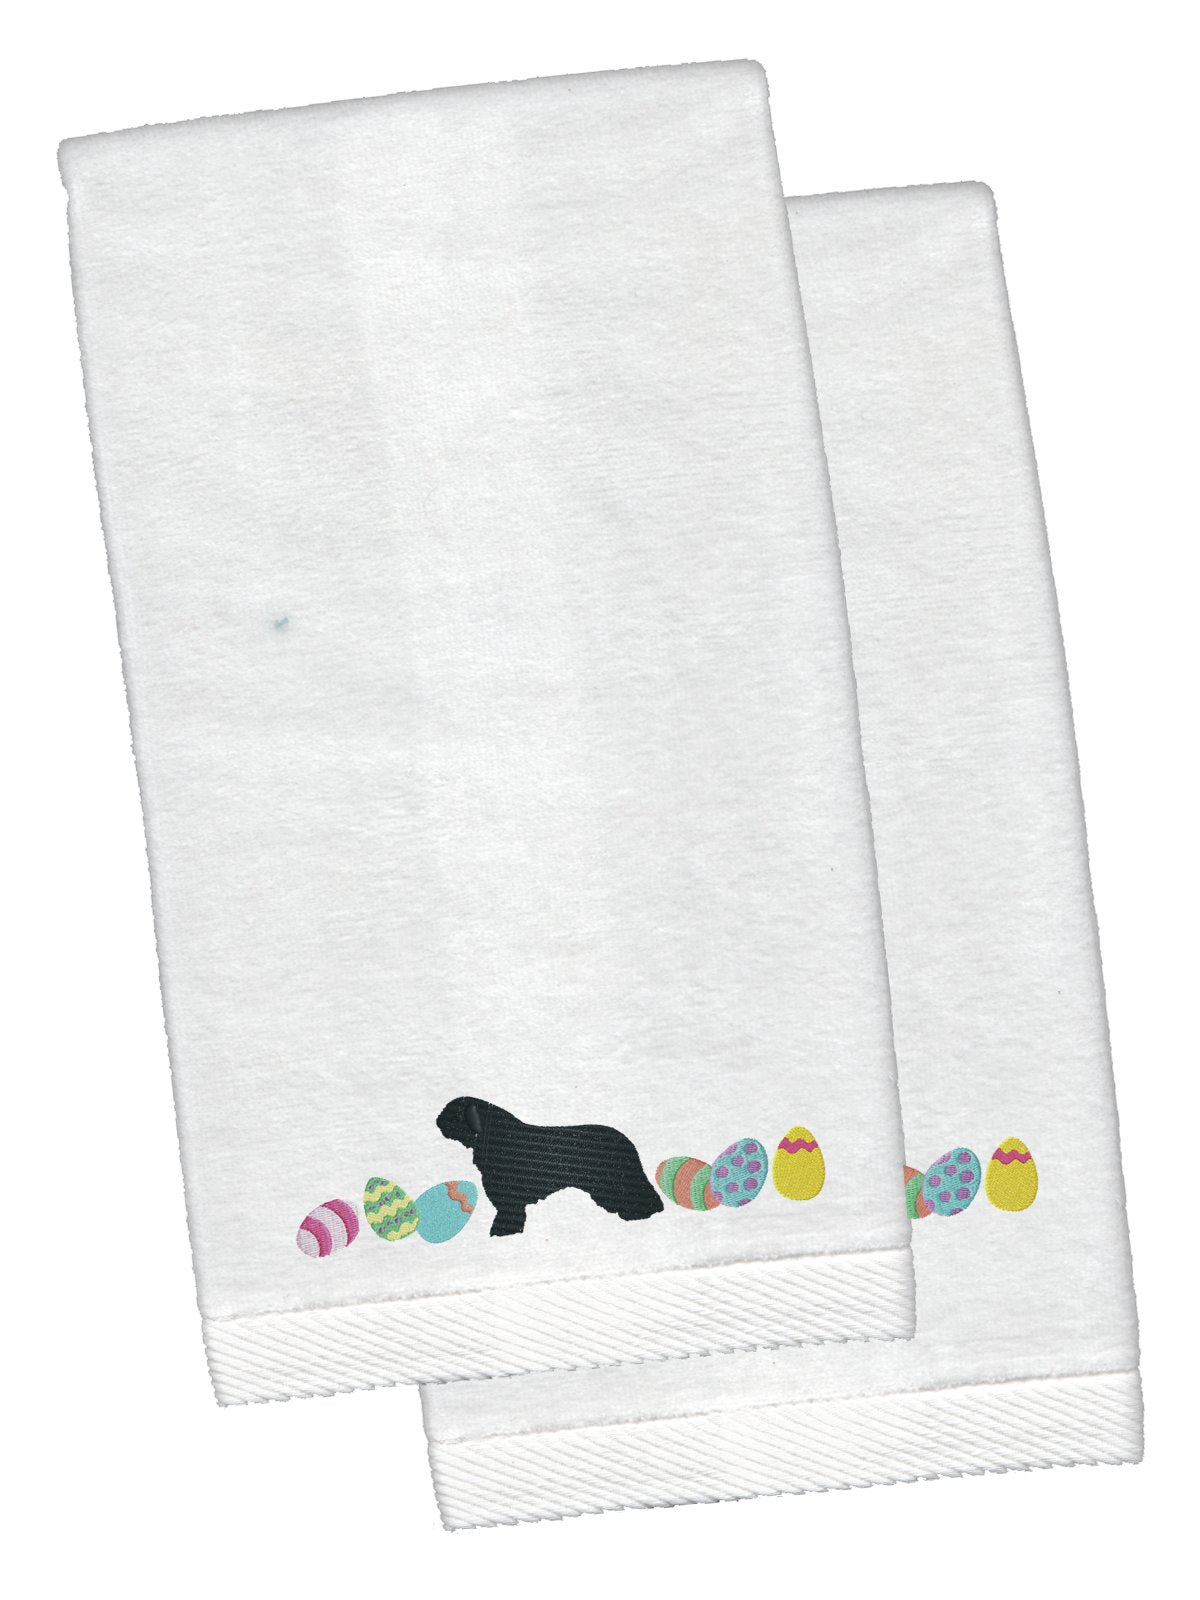 Spanish Water Dog Easter White Embroidered Plush Hand Towel Set of 2 CK1689KTEMB by Caroline's Treasures